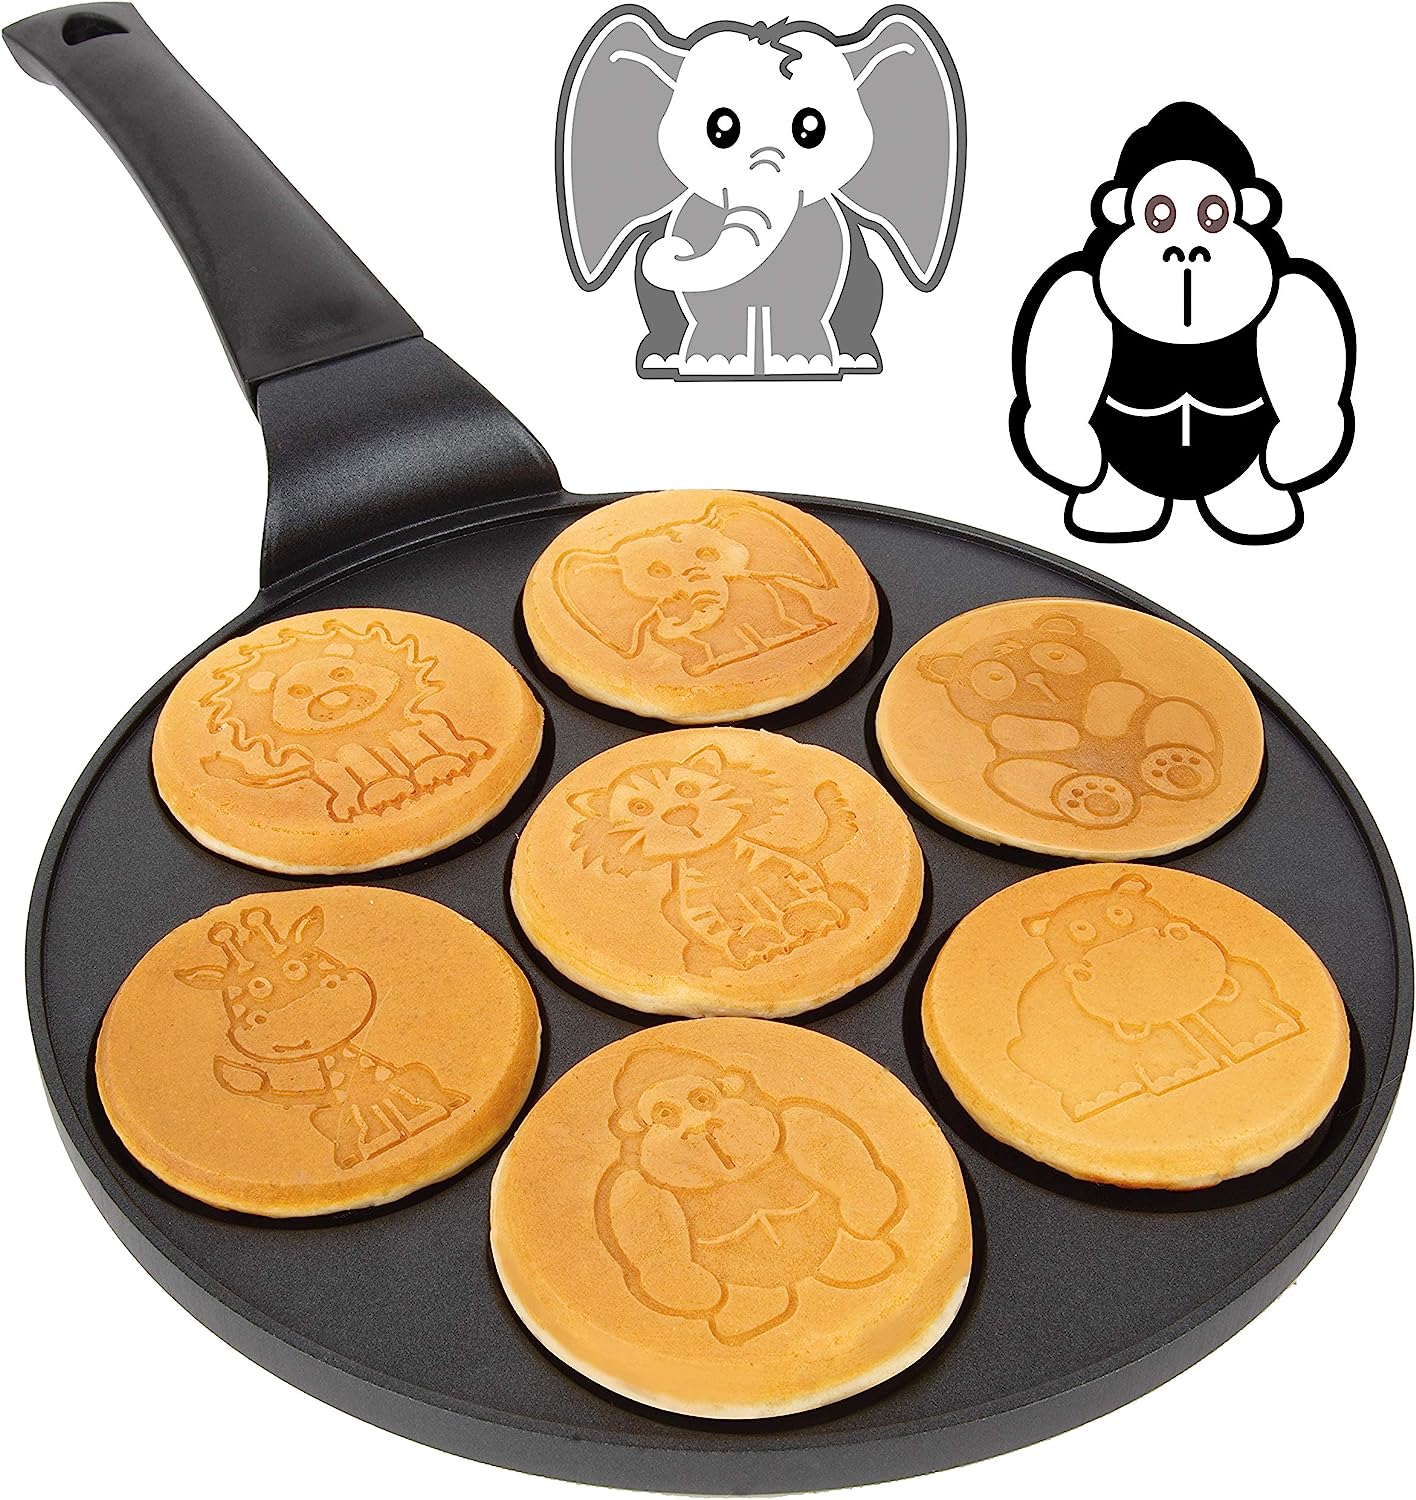 Puppy Friends Mini Pancake Pan - Make 7 Unique Flapjacks - Nonstick Griddle  for Breakfast Pup Animal Fun & Easy Cleanup - Fun Dog Related Gift for